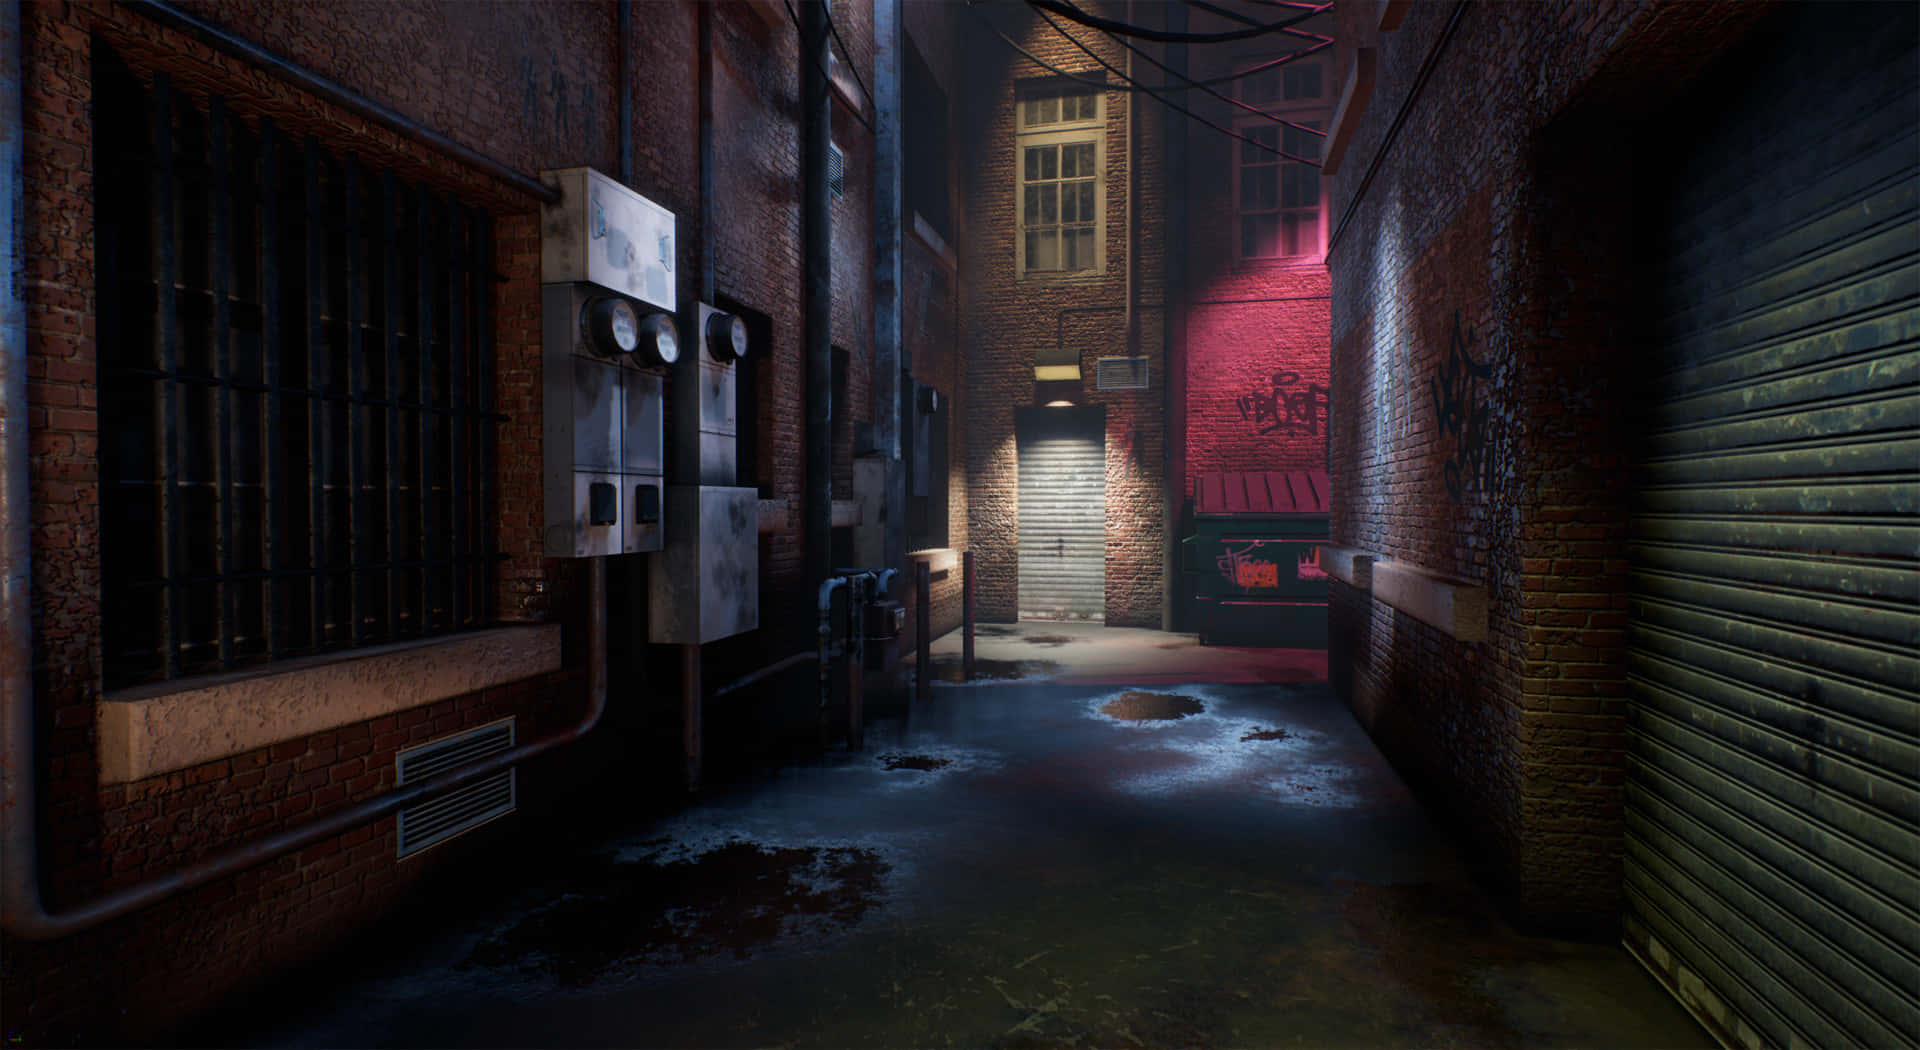 "A sinister alleyway waits in the dark"